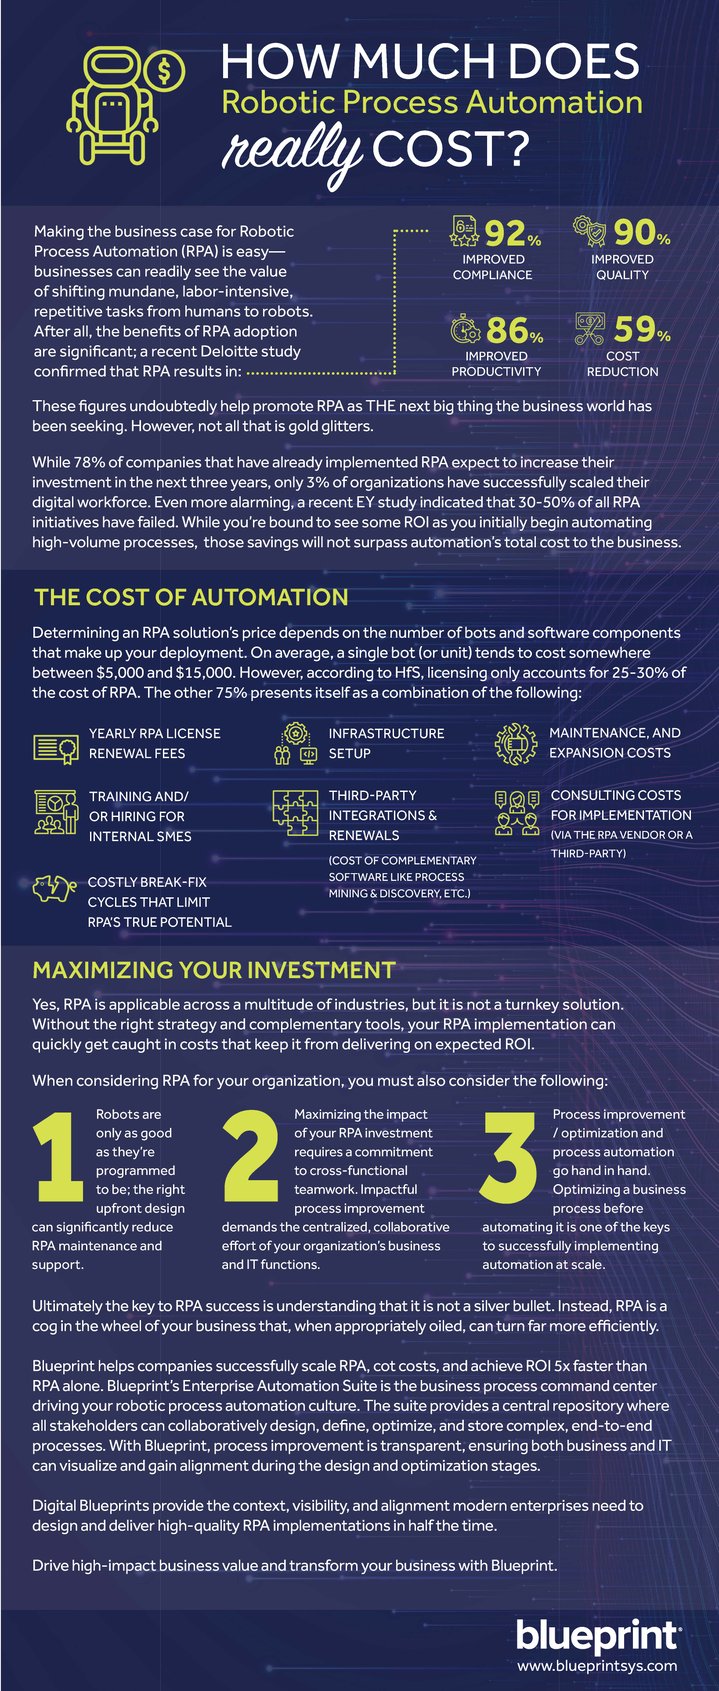 Underinddel Forsendelse protestantiske INFOGRAPHIC: How much does Robotic Process Automation (RPA) Really Cost?